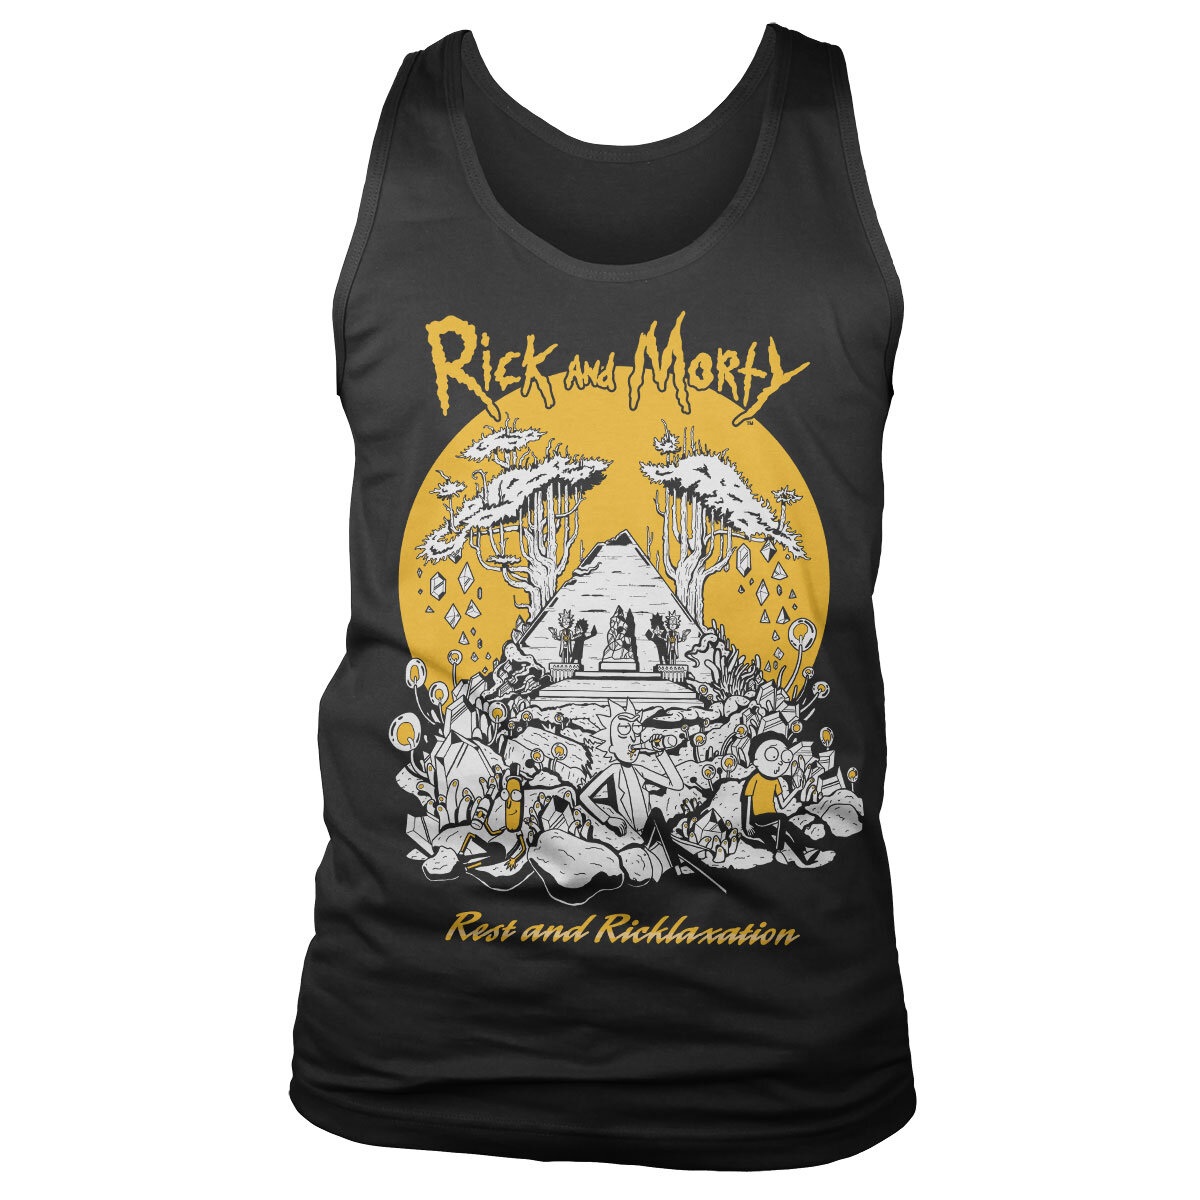 Rick And Morty - Rest And Ricklaxation Tank Top